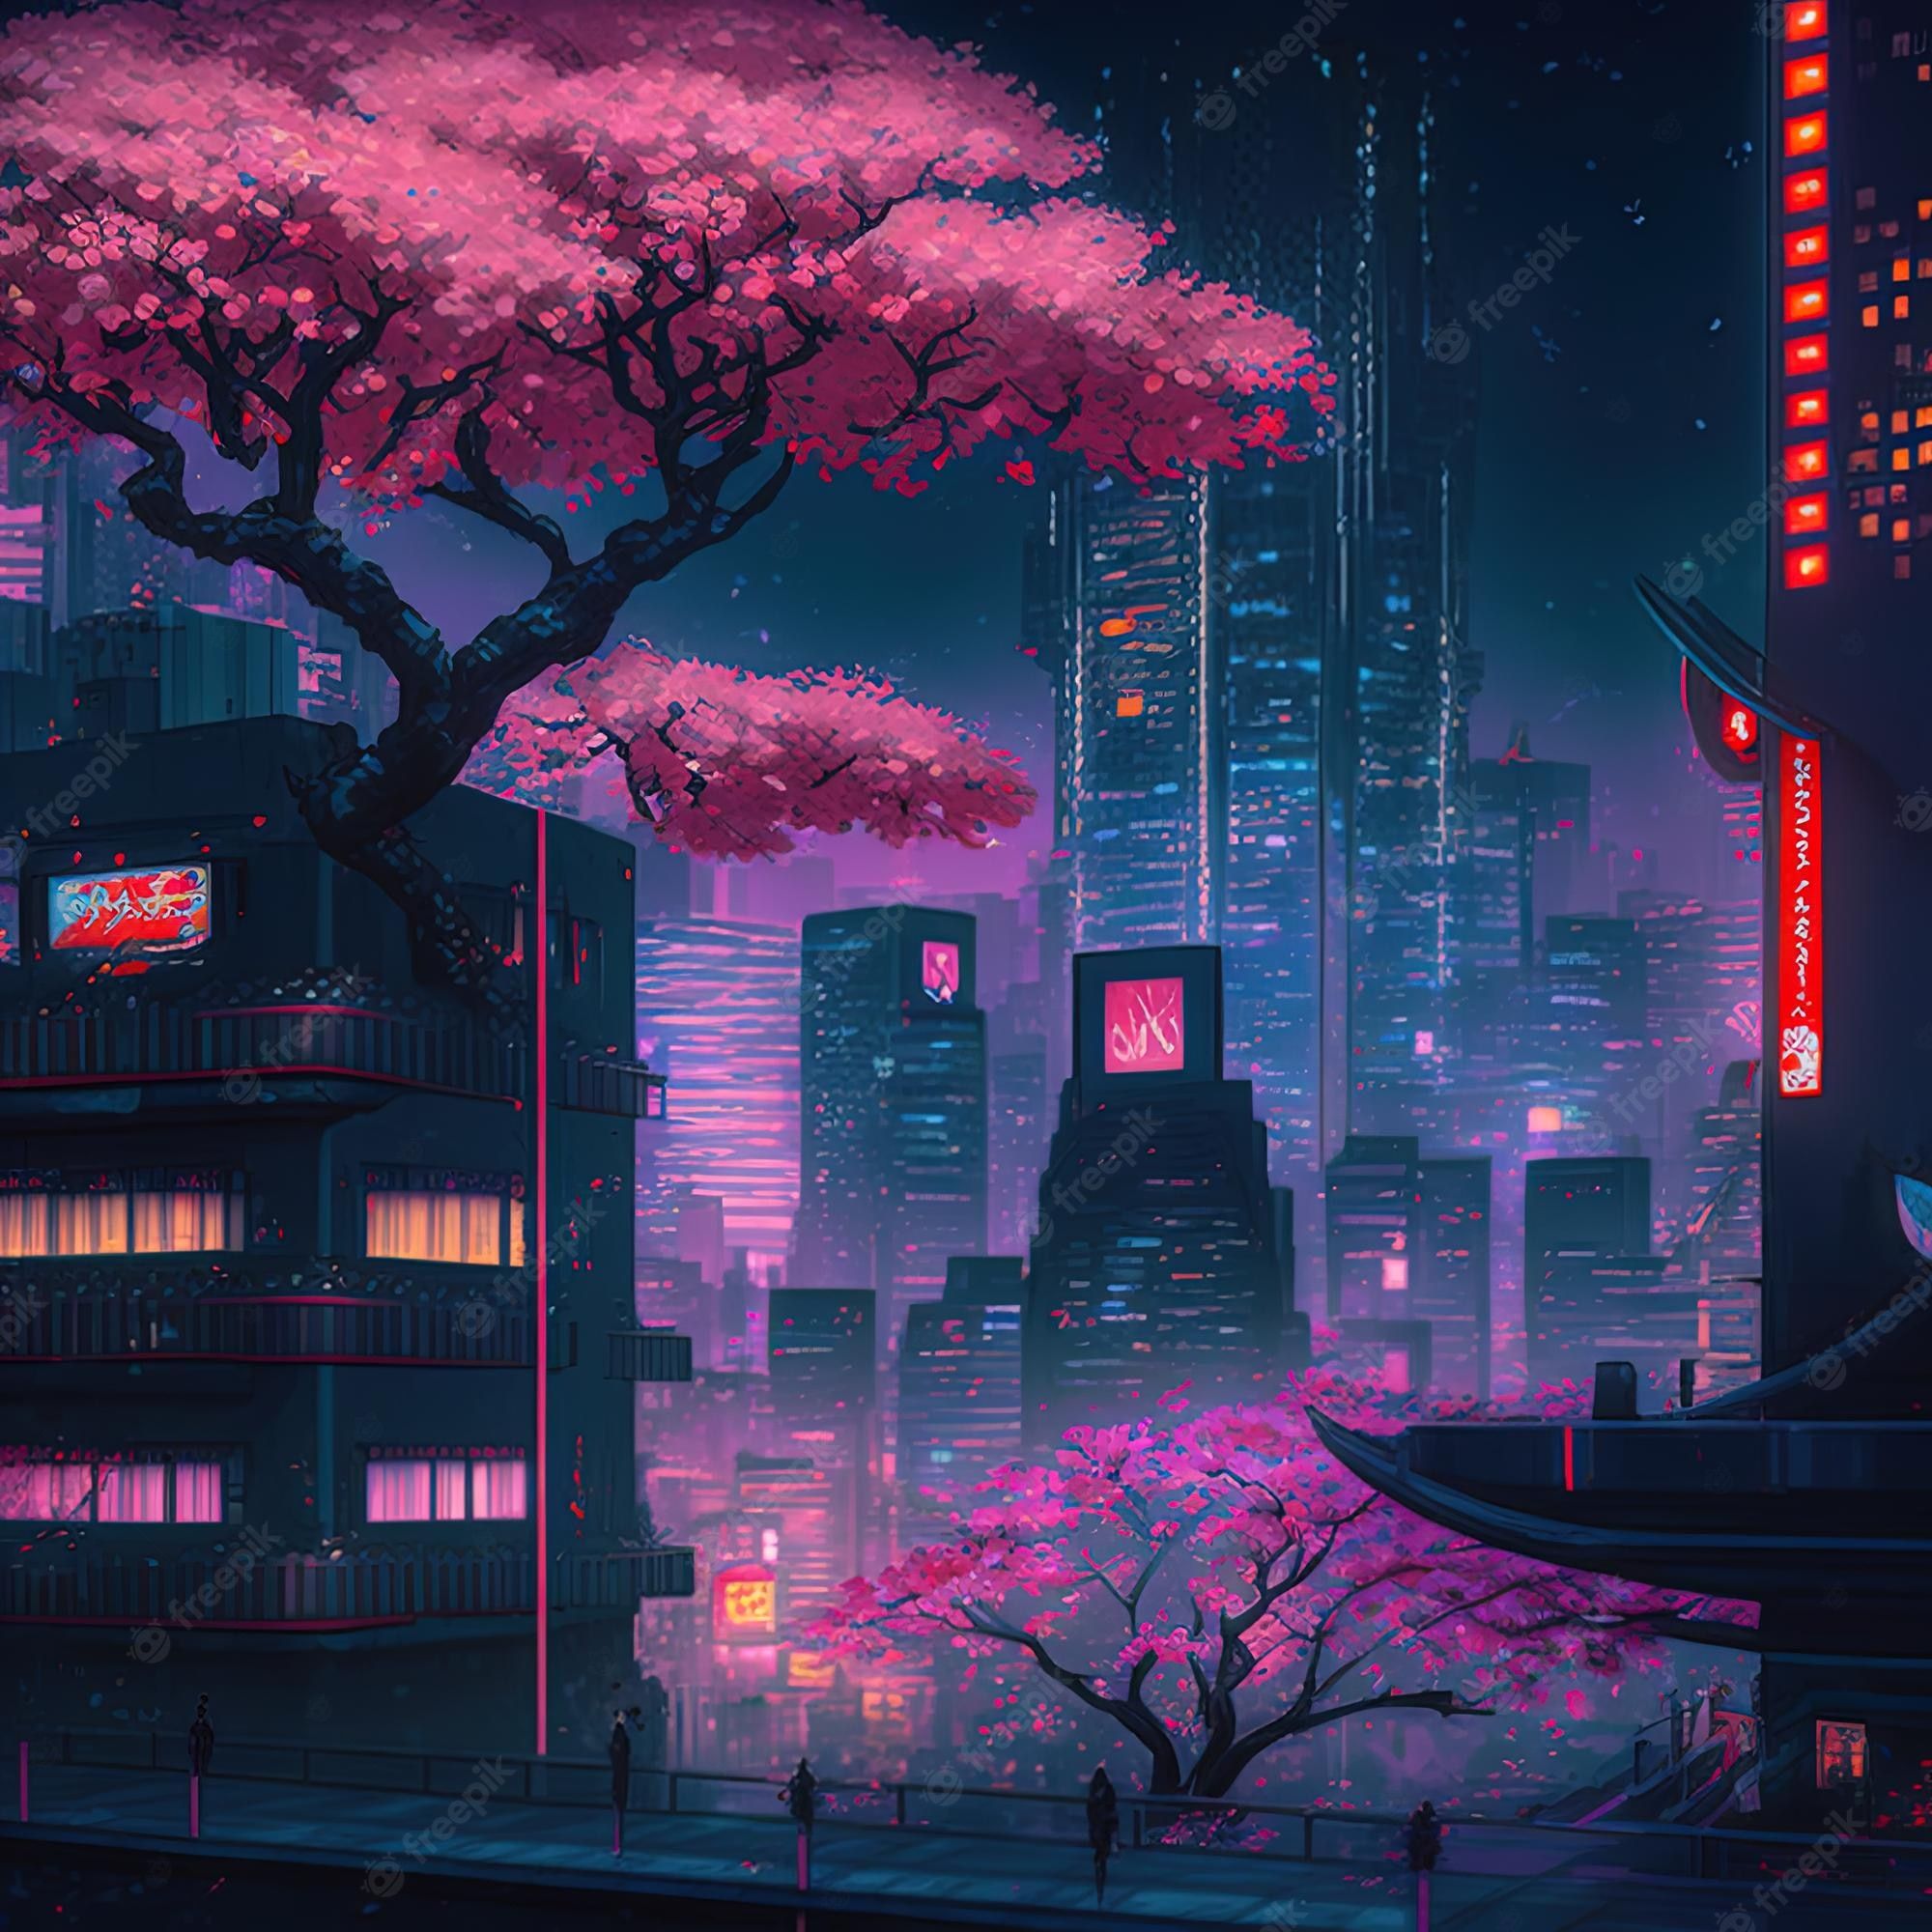 A city scene with buildings and trees - Lo fi